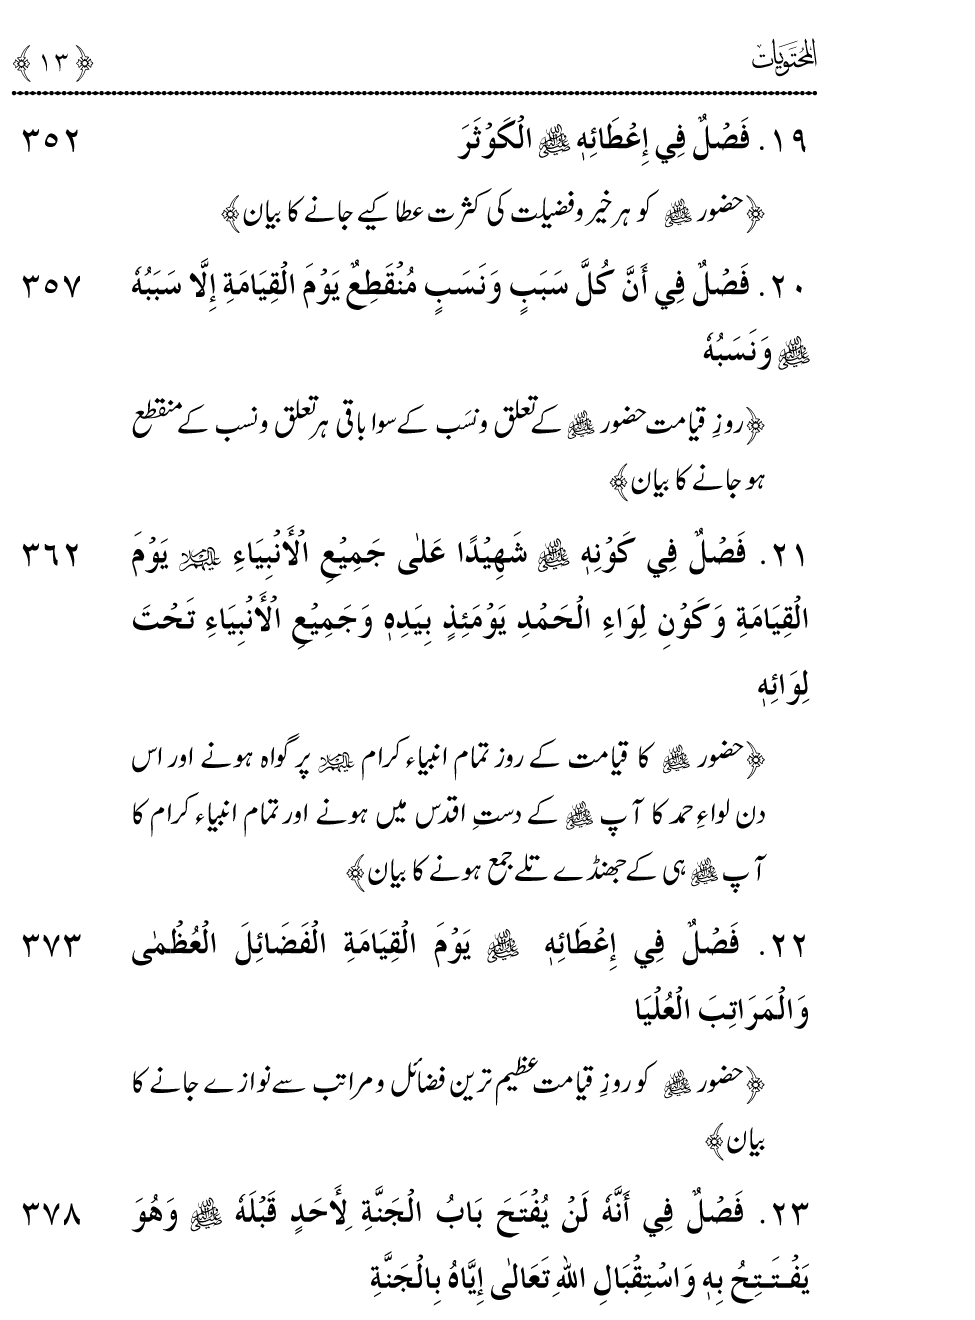 Ladders of Sunna for Deliverance from Deviation and Tribulations (Vol. 4)